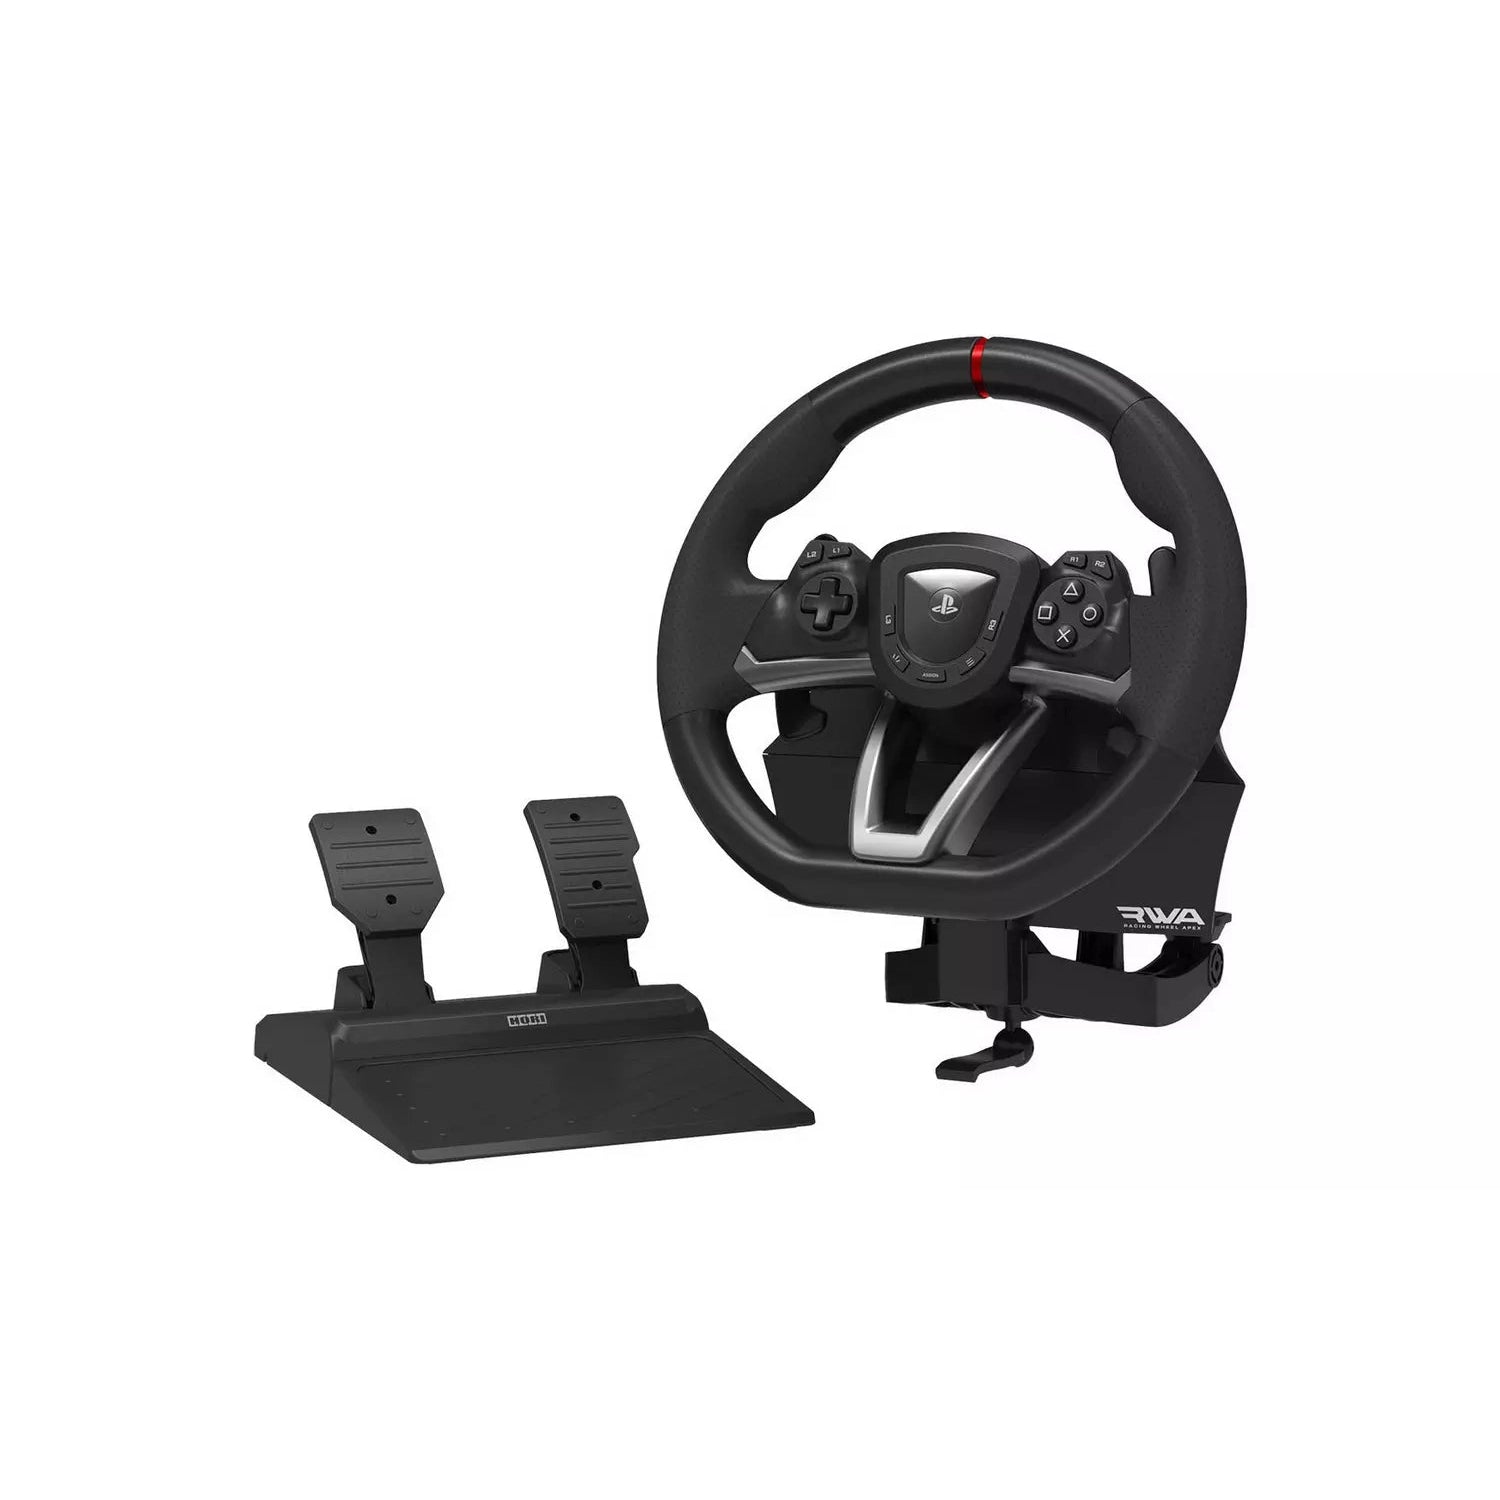 Hori Racing Wheel and Foot Pedals Apex For PlayStation 4